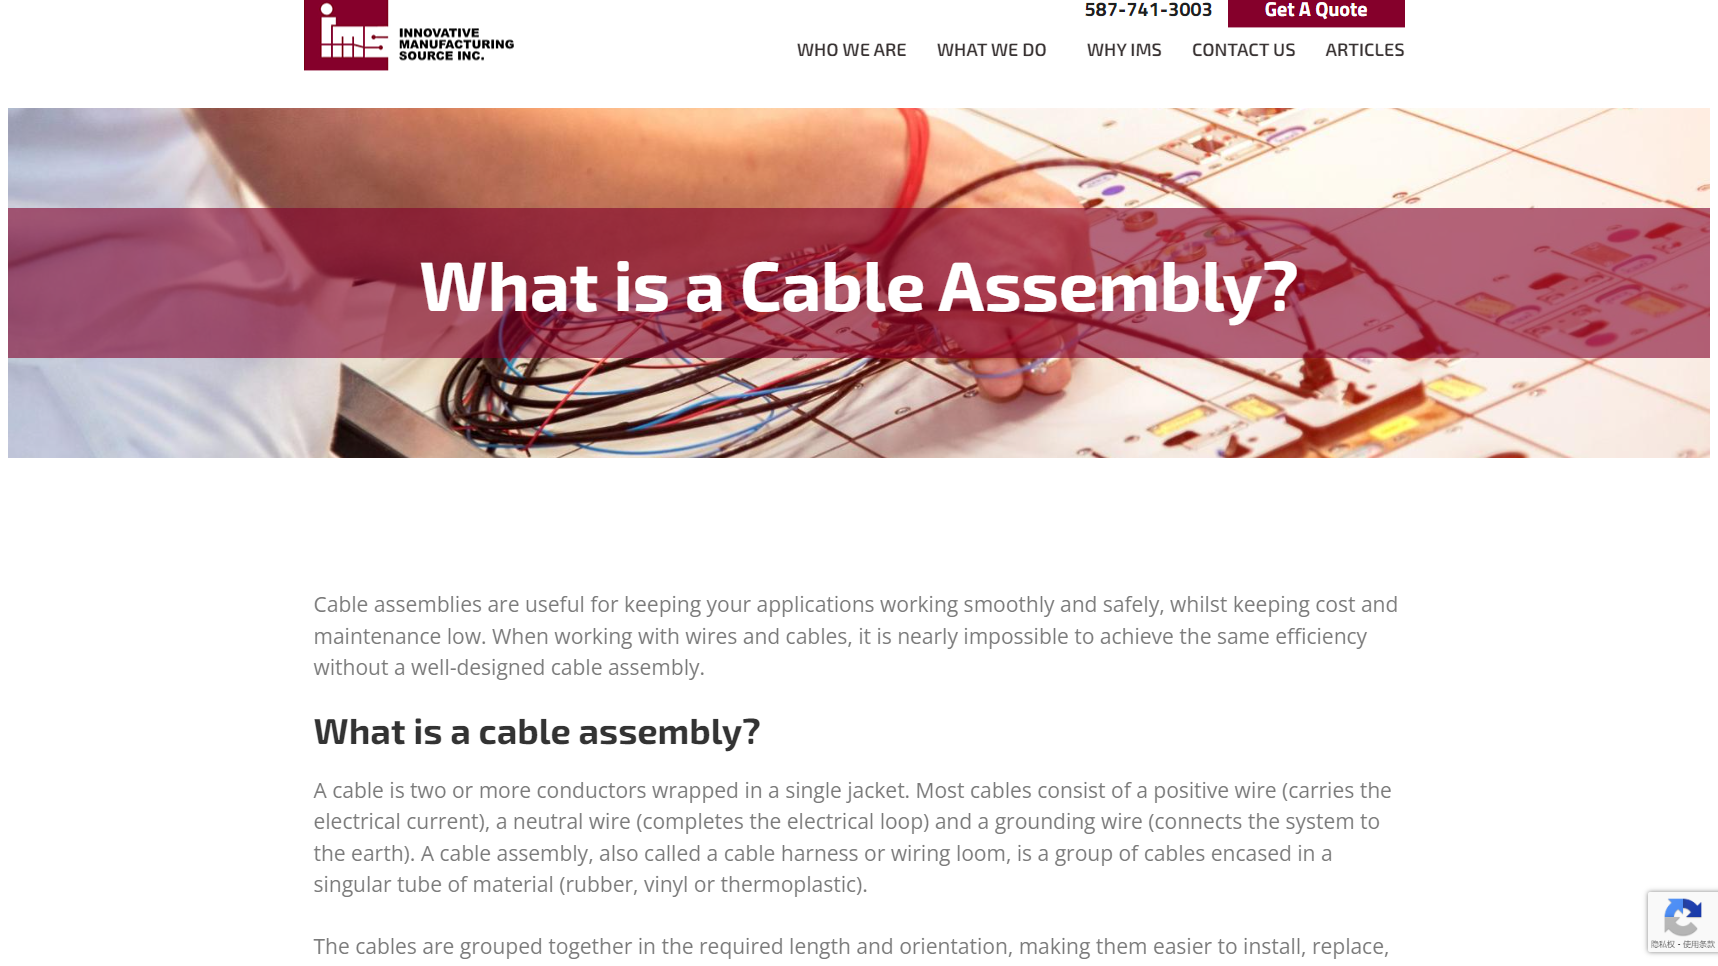 IMS Manufacturing - Cable Assembly Manufacturer